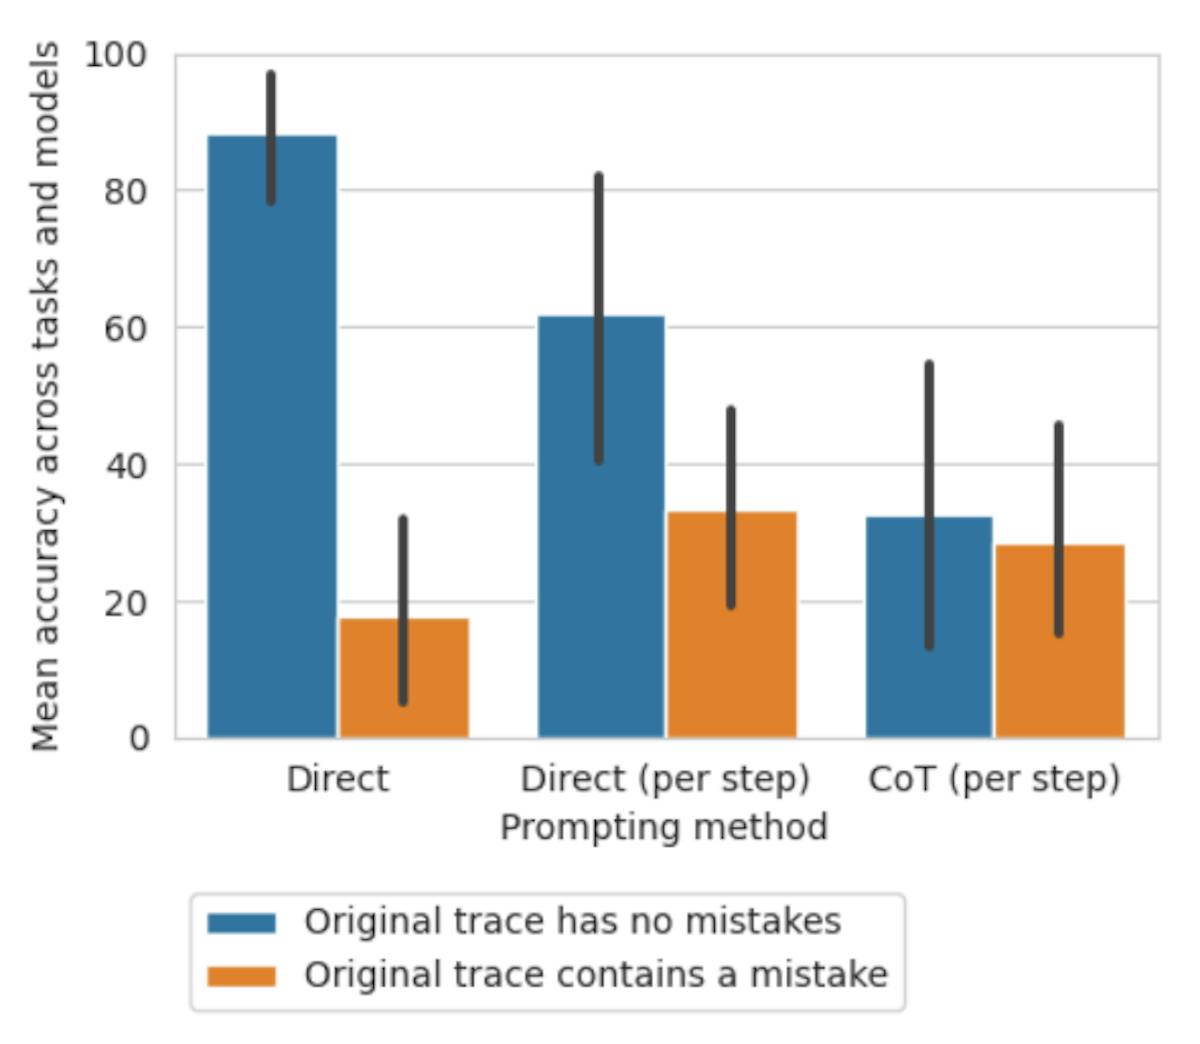 Figure 1: Graph of mistake location accuracies for each prompting method (excluding GPT-4-Turbo which wedo not have CoT step-level results for). Blue bars show accuracies on traces with no mistakes, so the model must predict that the trace has no mistake to be considered correct; orange bars show accuracies on traces with a mistake, so the model must predict the precise location of the mistake to be considered correct.